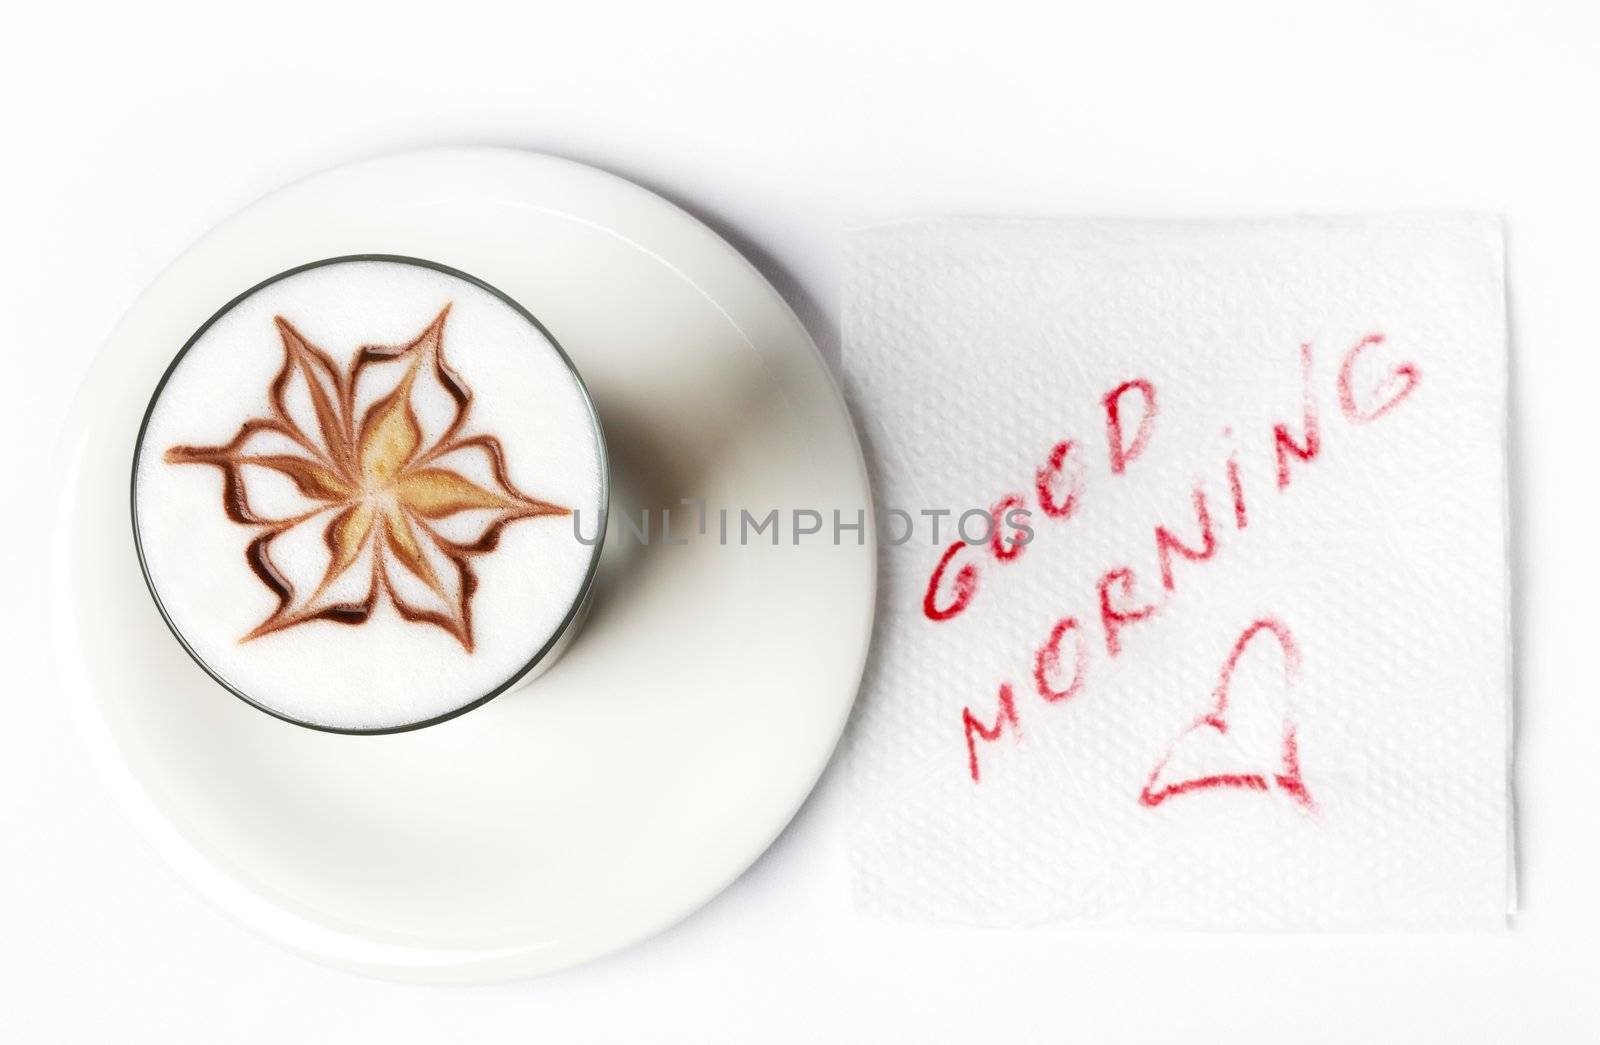 barista latte coffee glass with good morning note on tissue